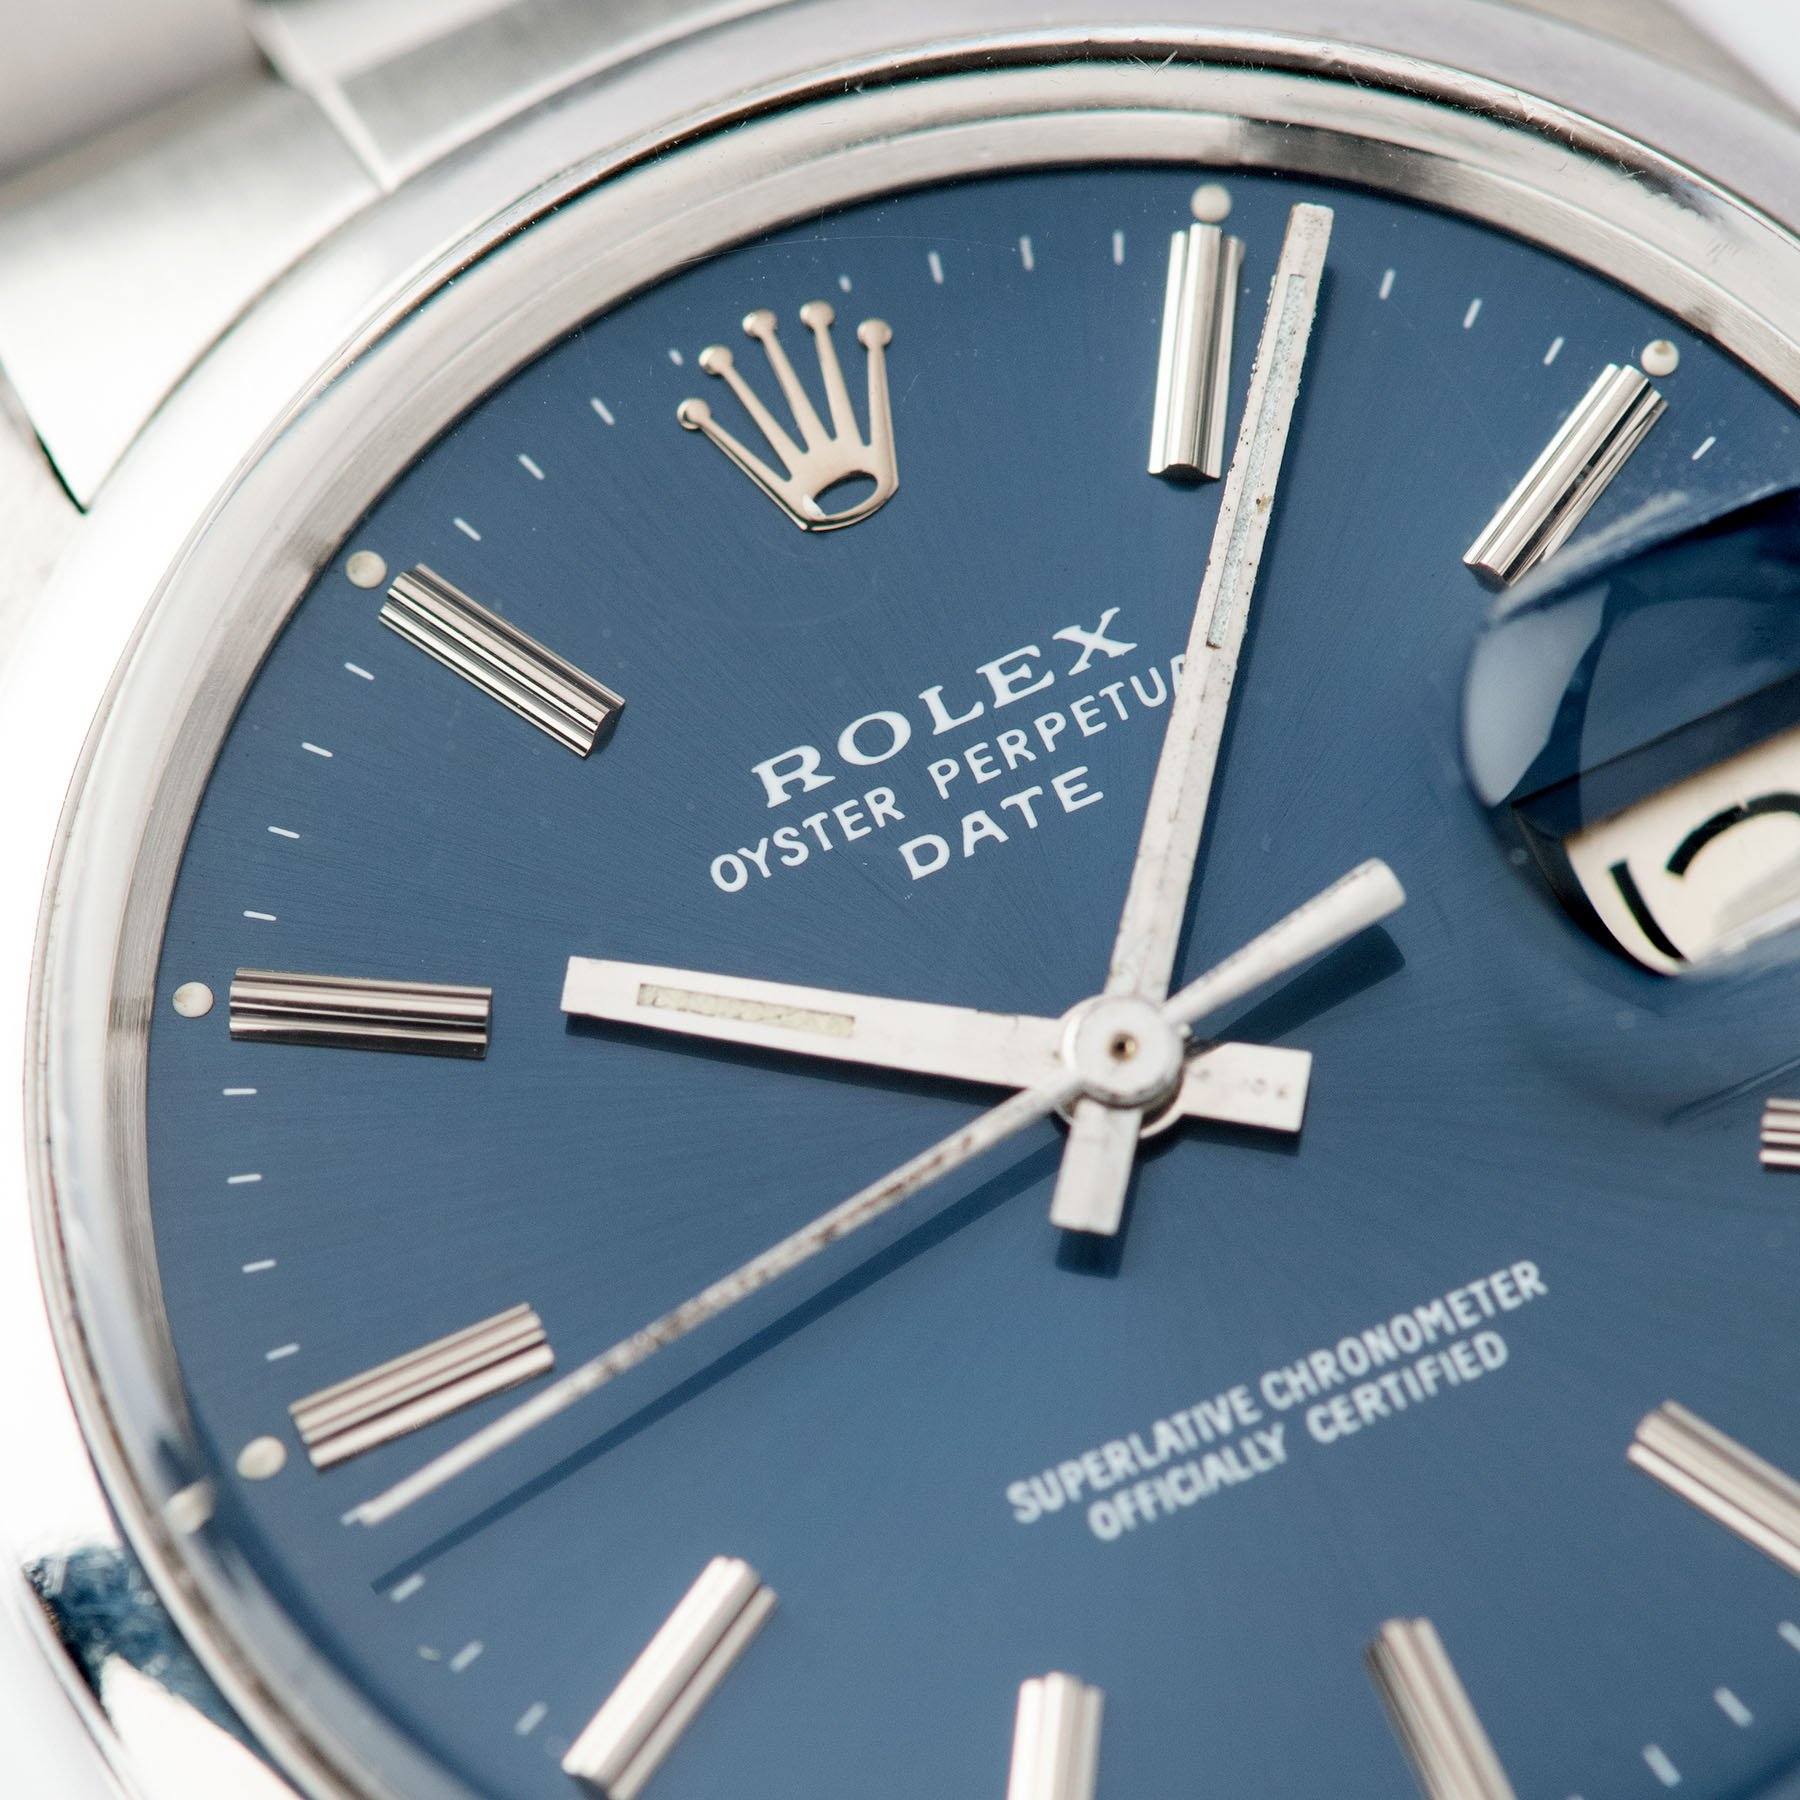 Rolex OP Date Reference 1500 Blue Soleil Dial with  lume plots